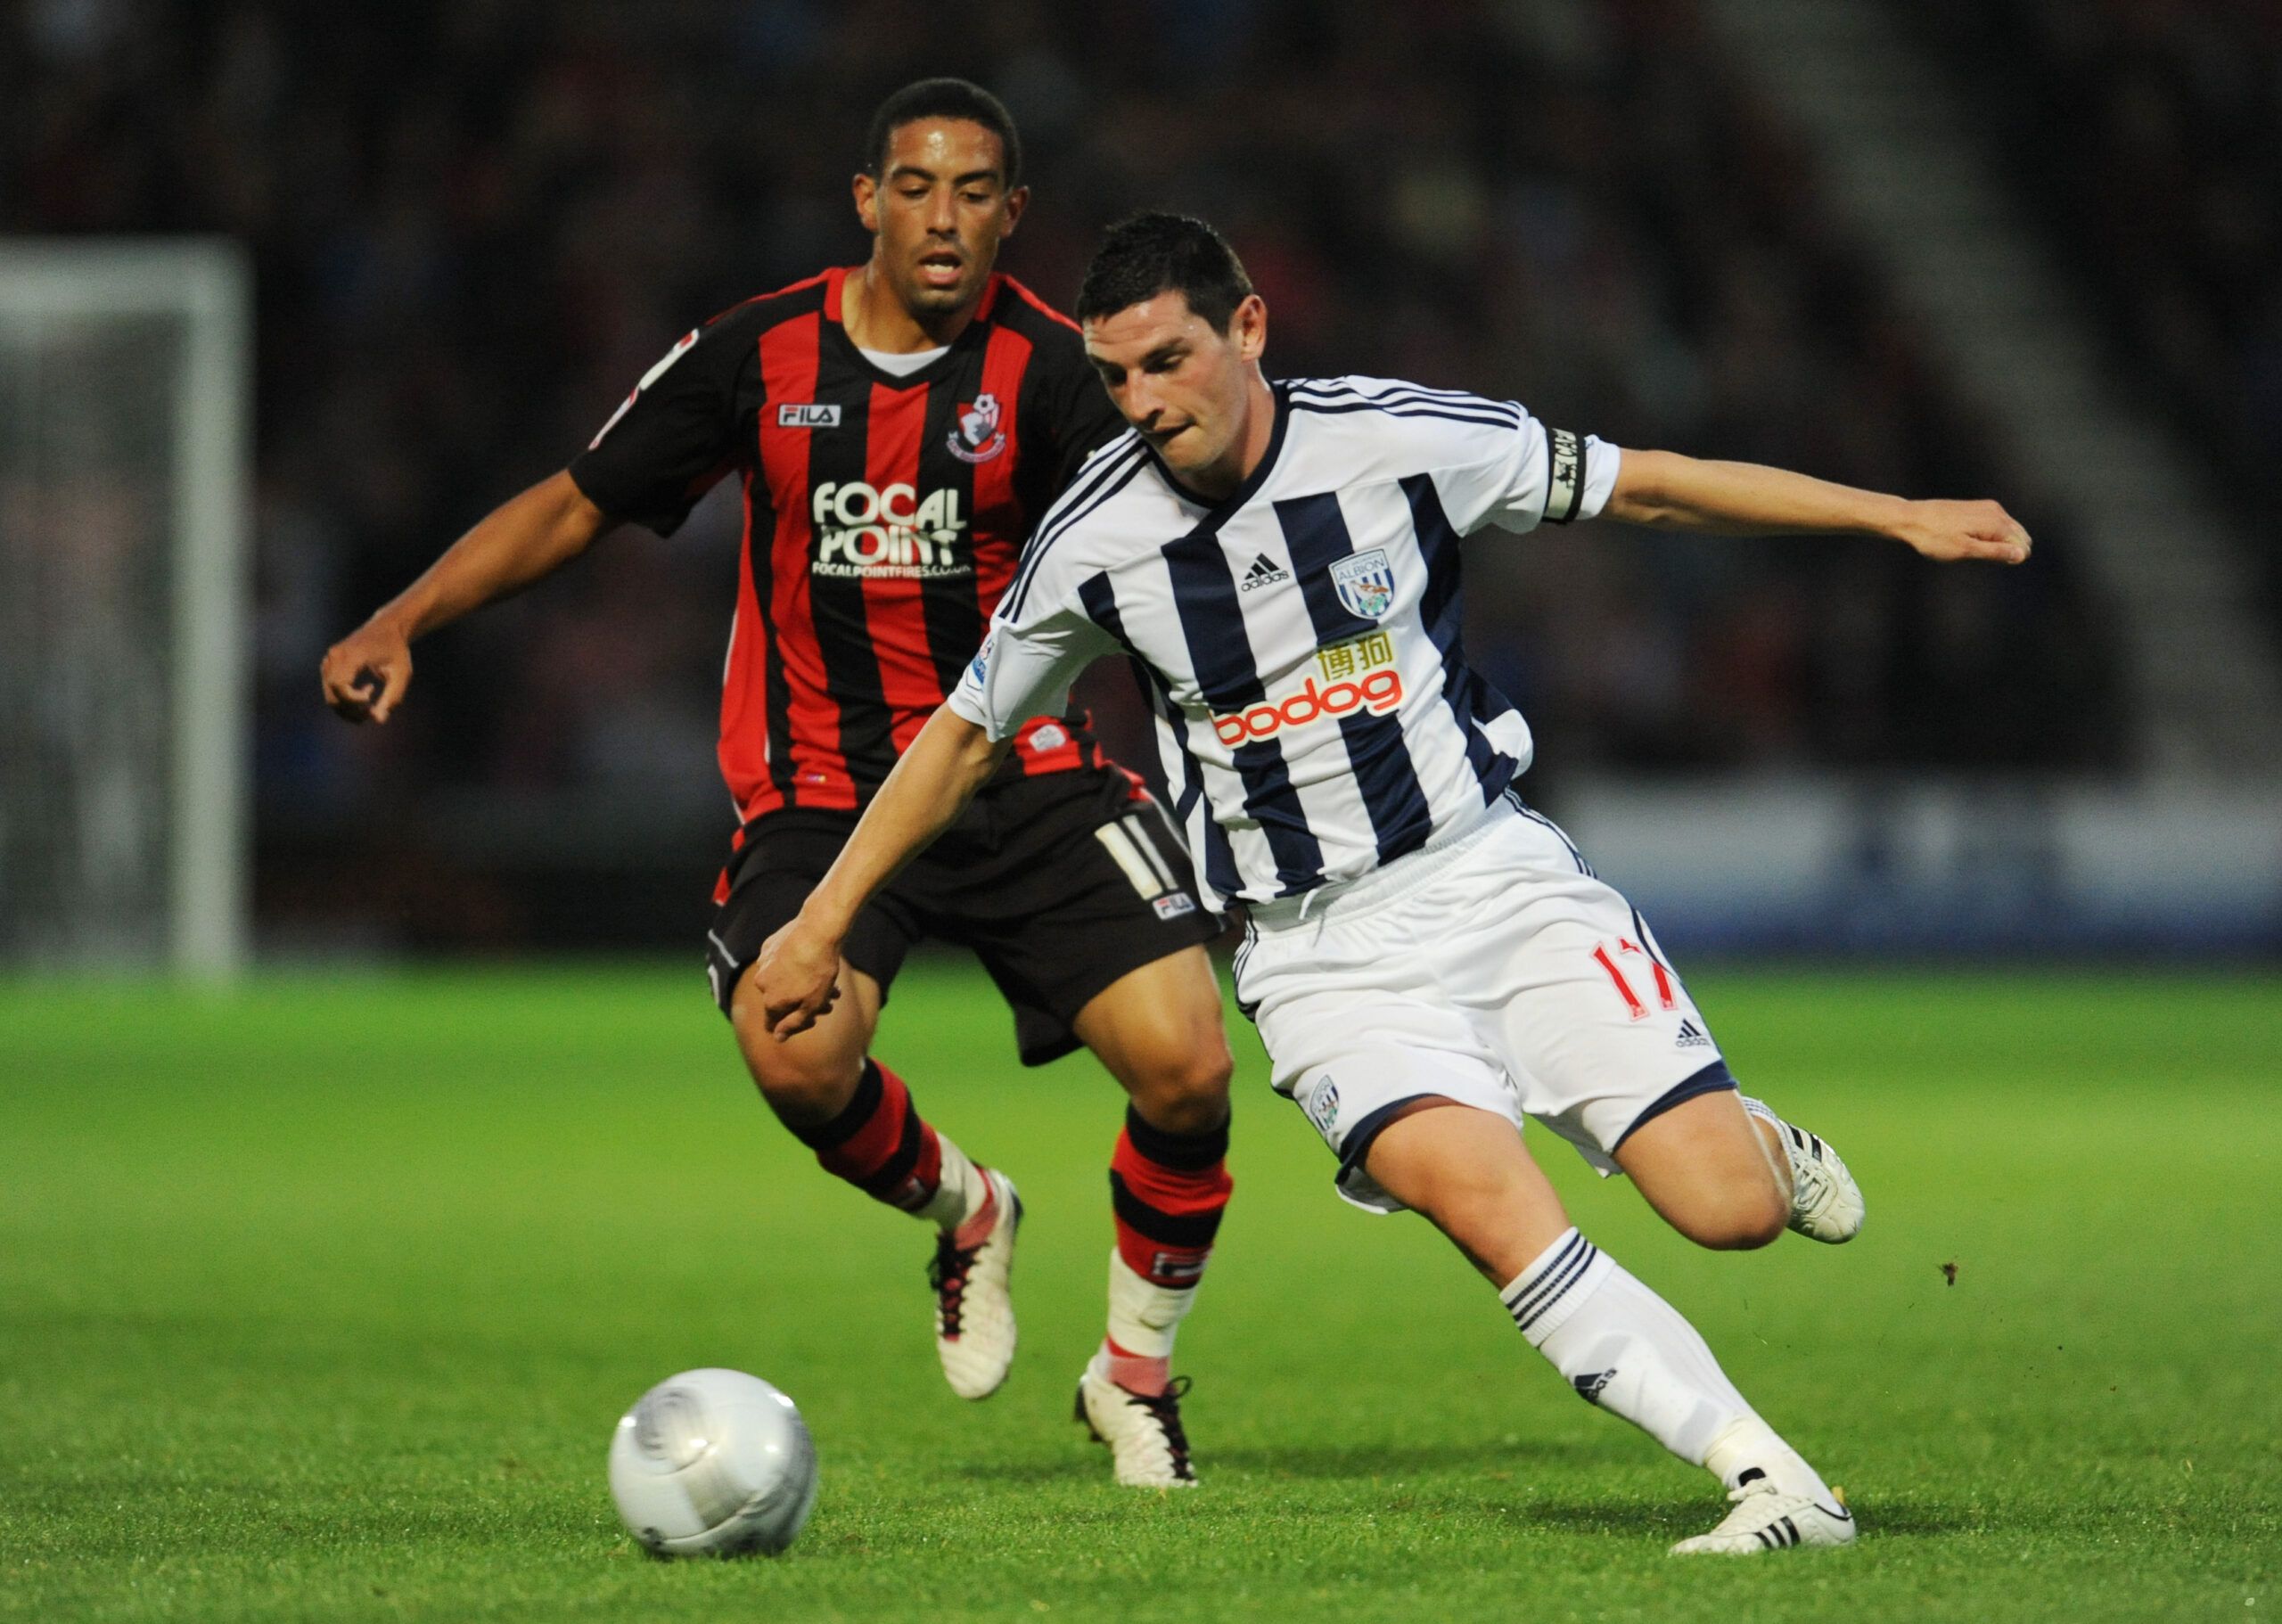 Football - AFC Bournemouth v West Bromwich Albion - Carling Cup Second Round - Dean Court - 11/12 - 23/8/11 
Liam Feeney (L) - AFC Bournemouth in action against Graham Dorrans - West Bromwich Albion 
Mandatory Credit: Action Images / Tony O'Brien 
EDITORIAL USE ONLY. No use with unauthorized audio, video, data, fixture lists, club/league logos or live services. Online in-match use limited to 45 images, no video emulation. No use in betting, games or single club/league/player publications.